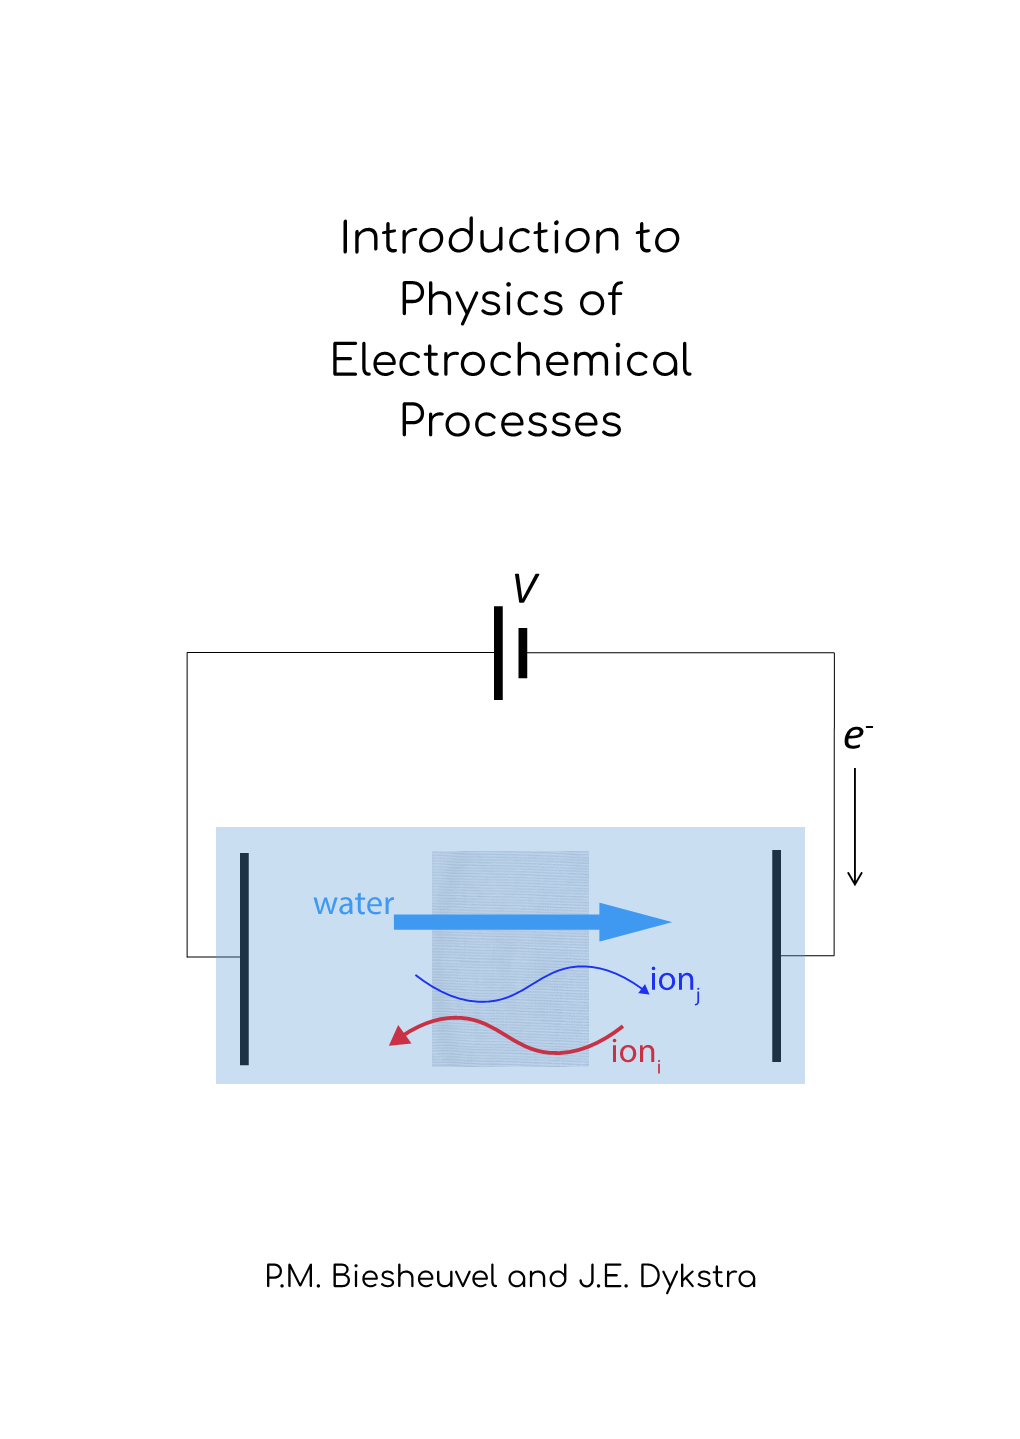 Introduction to Physics of Electrochemical Processes